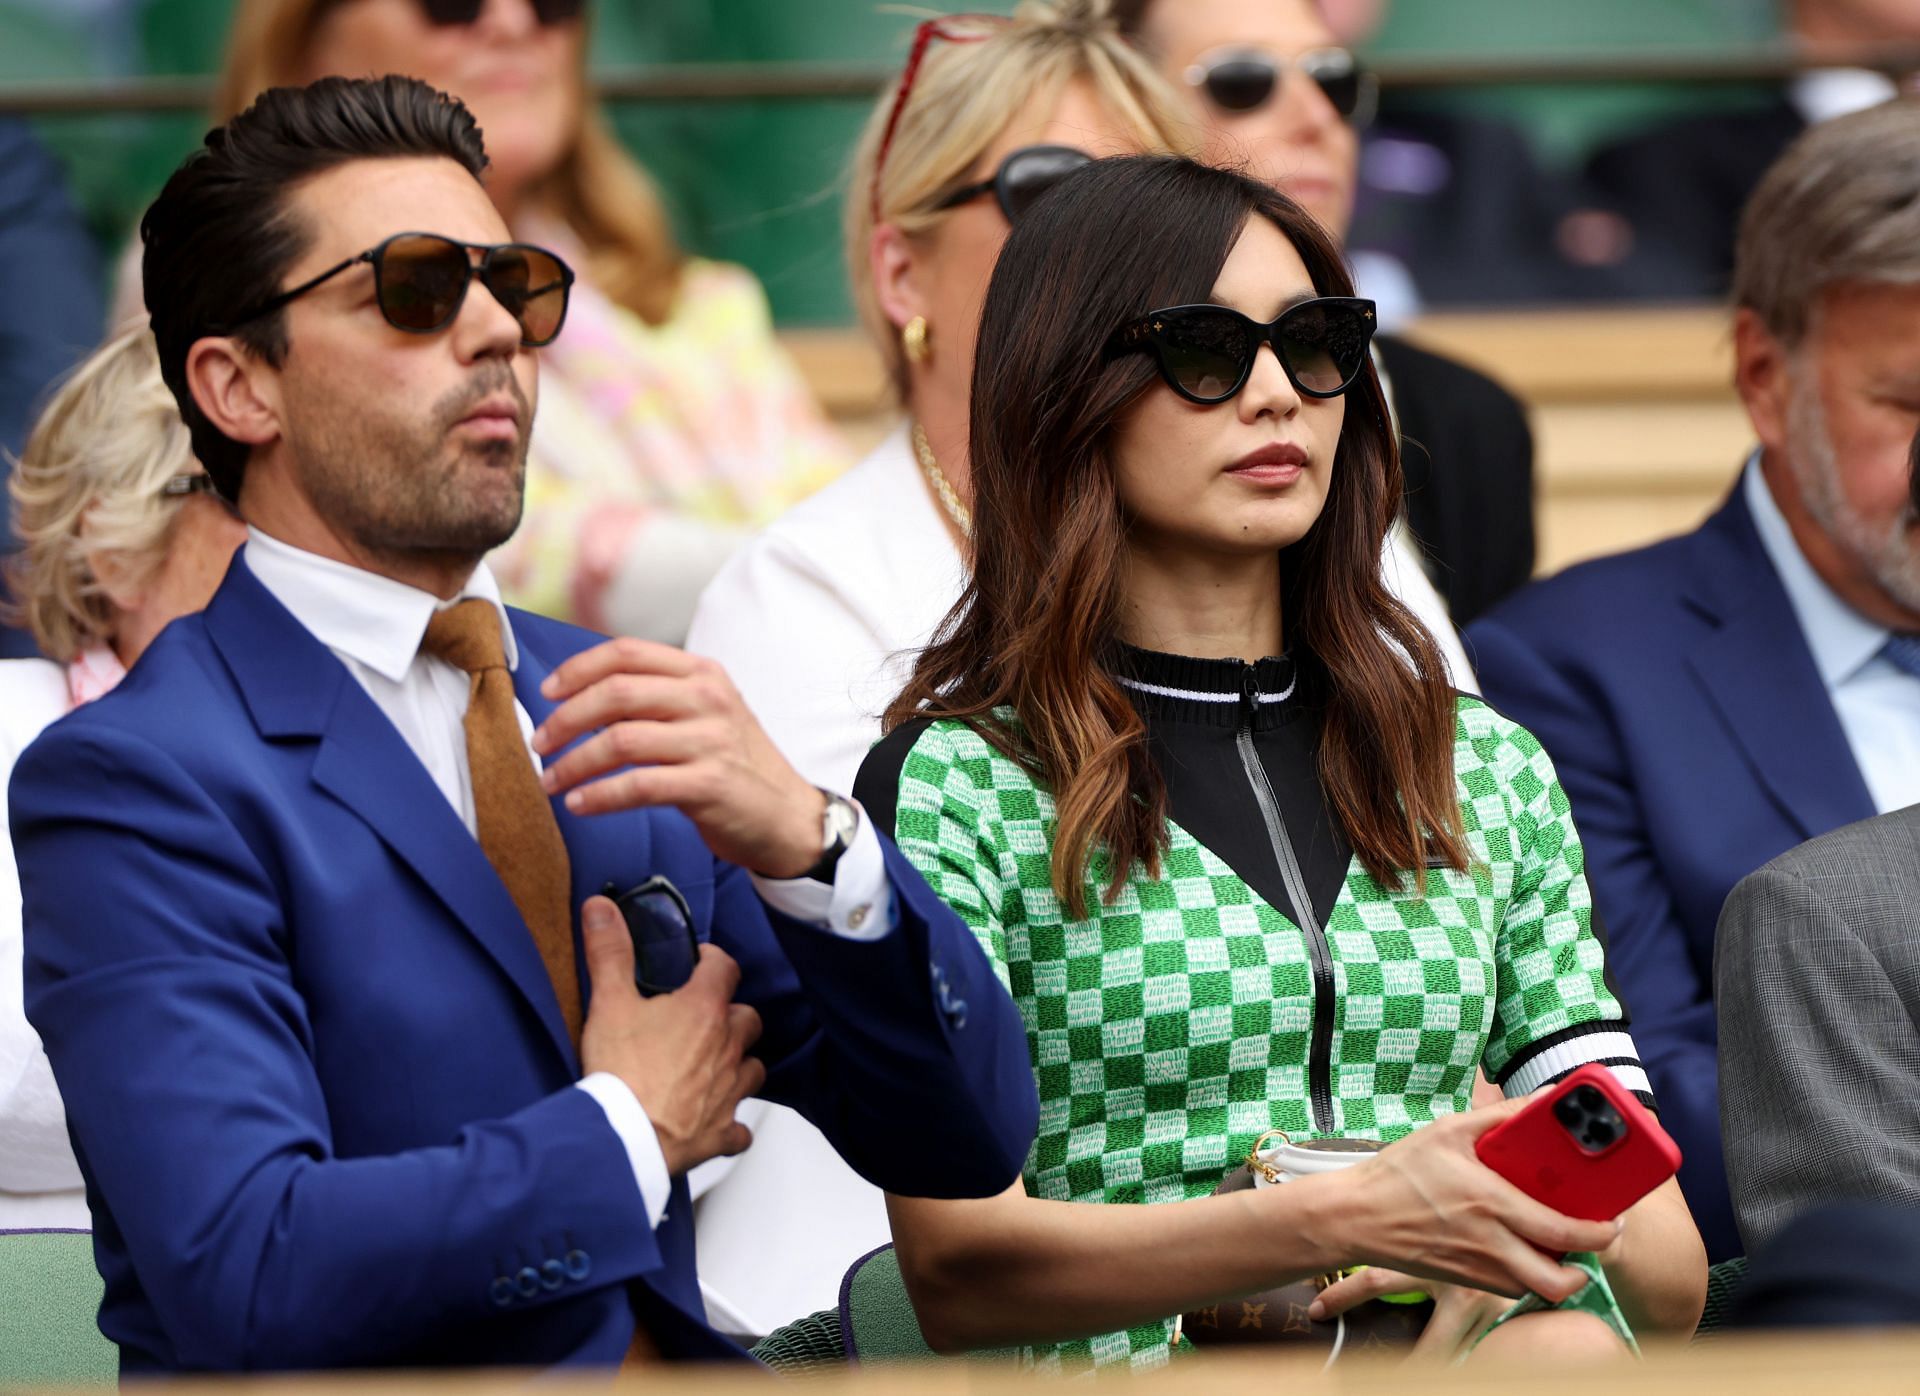 Dominic Cooper and Gemma Chan watching Nadal-Fritz match.